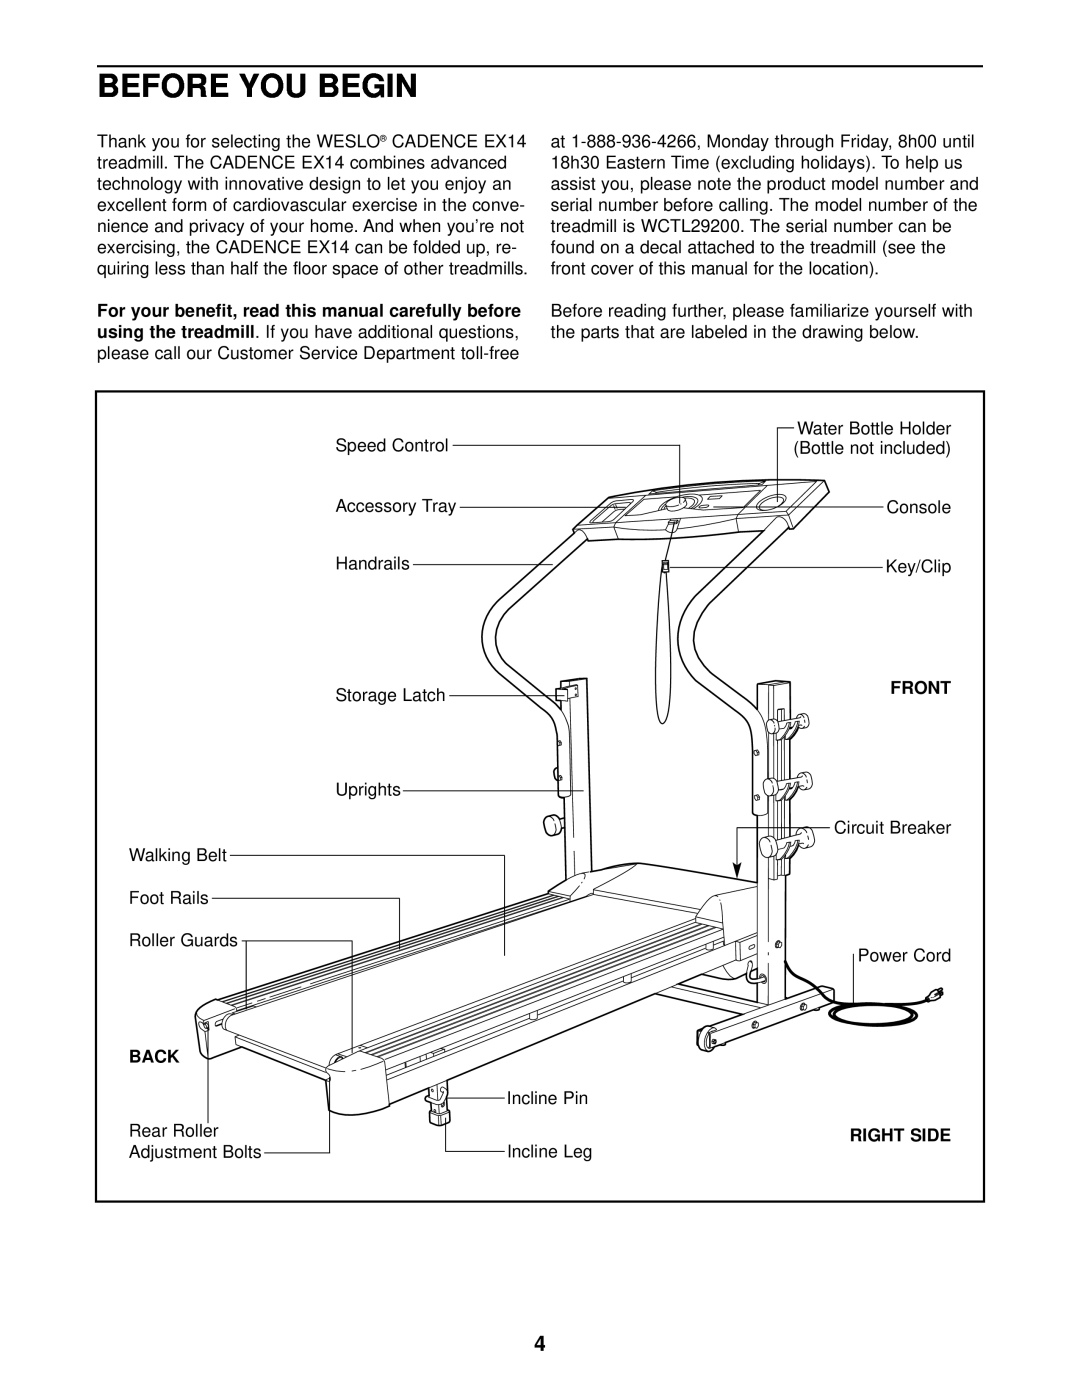 Weslo WCTL29200 user manual Before You Begin, Front, Back, Right Side 